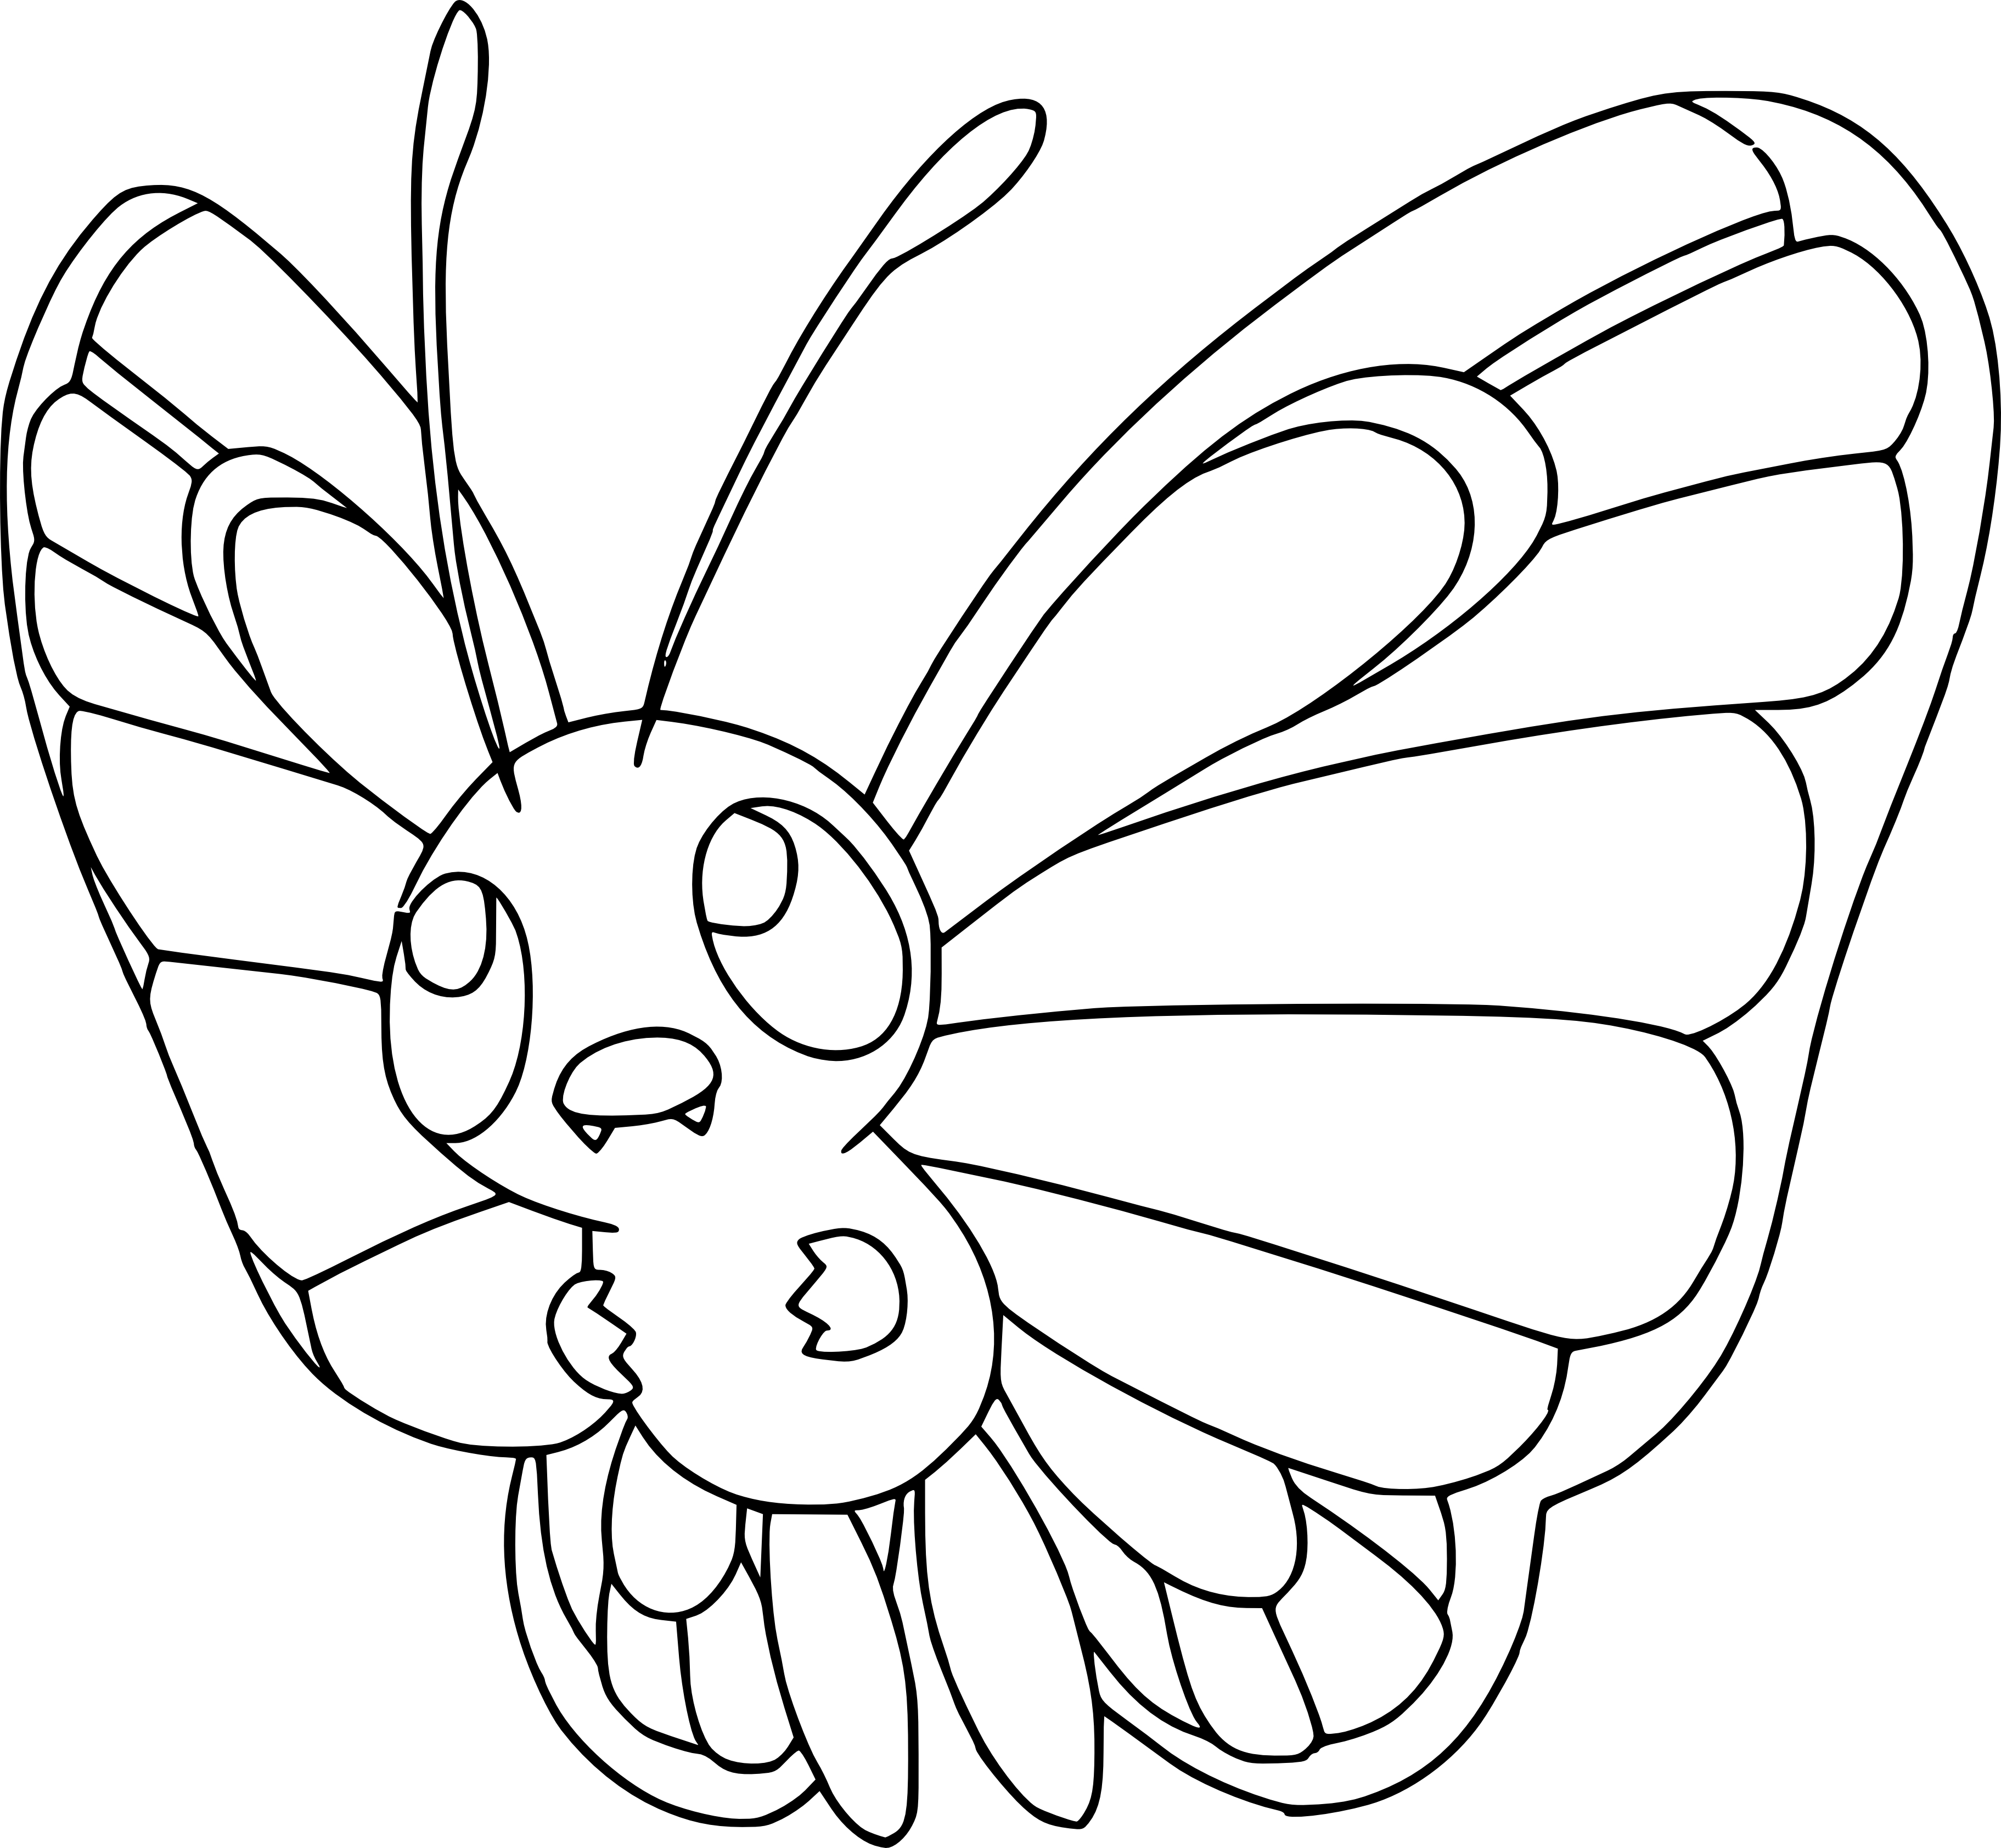 Butterfree Pokemon coloring page